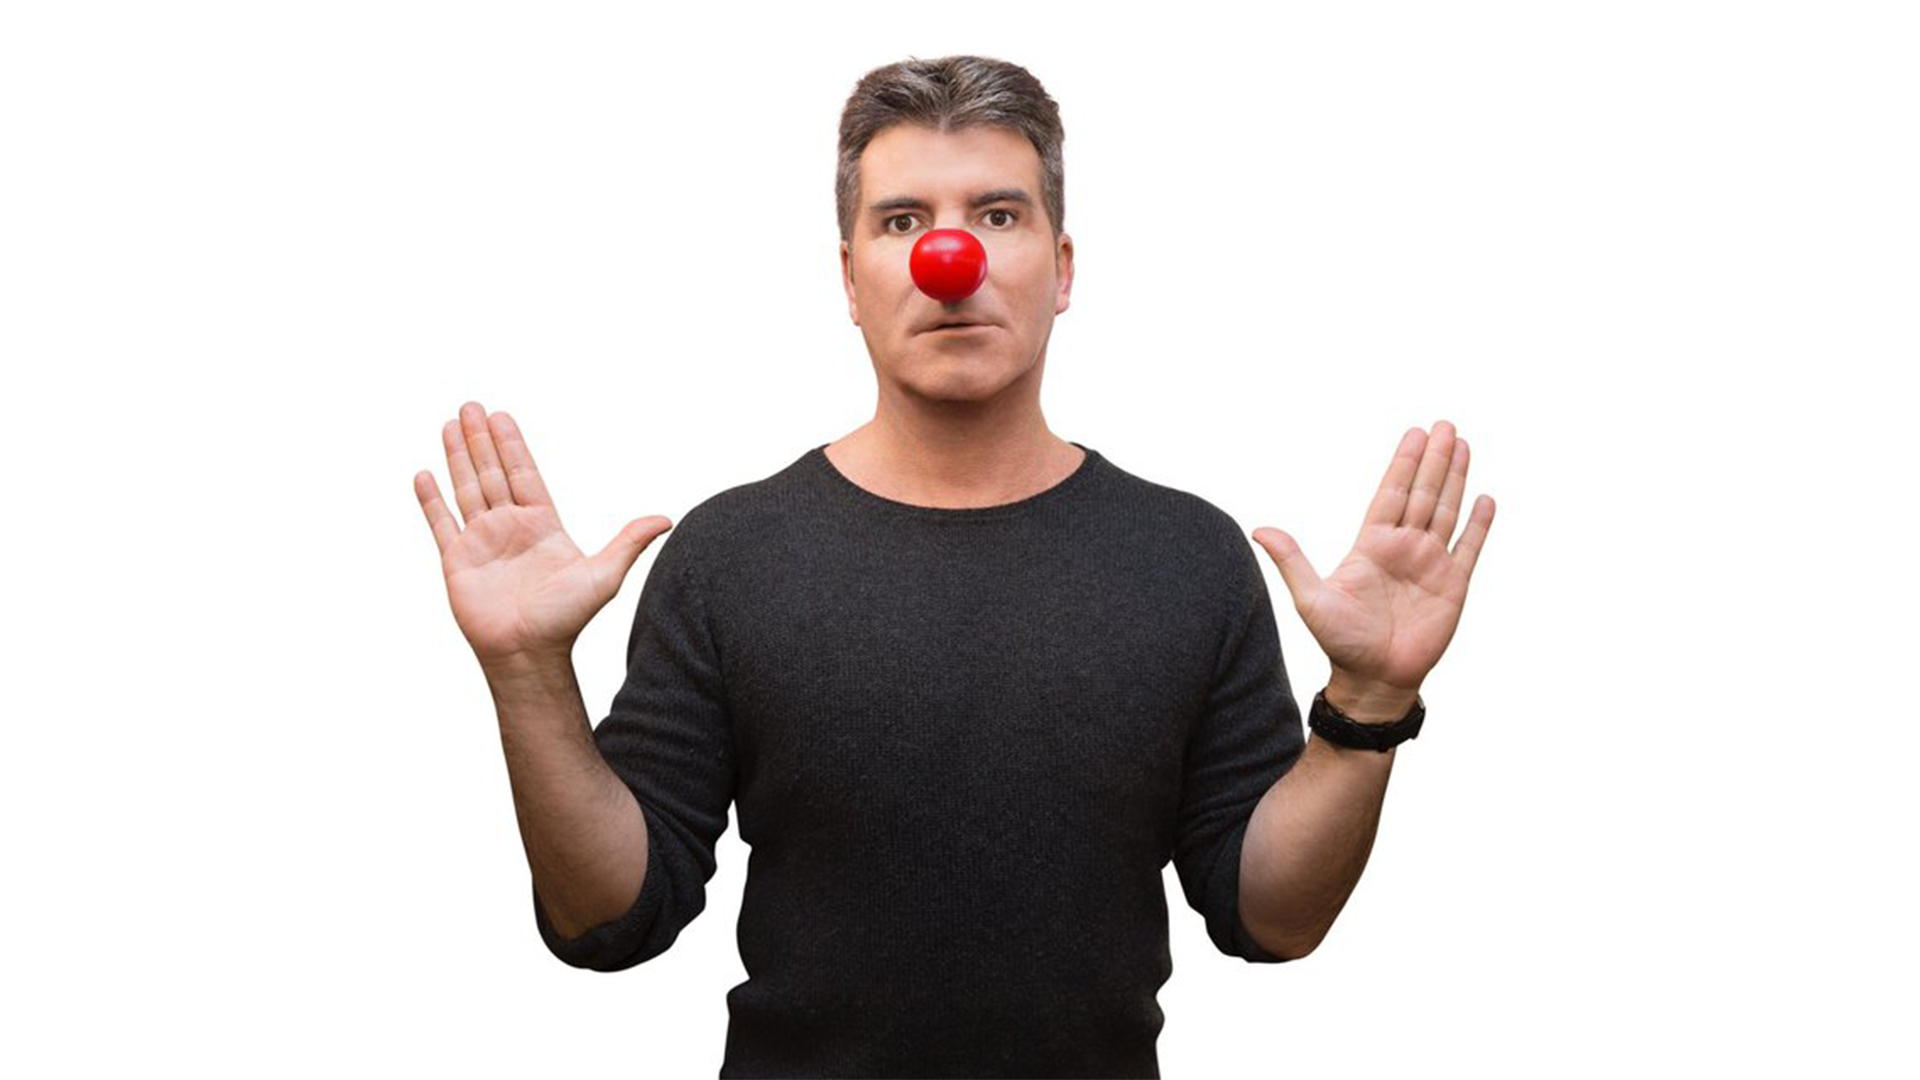 Simon Cowell with a red nose